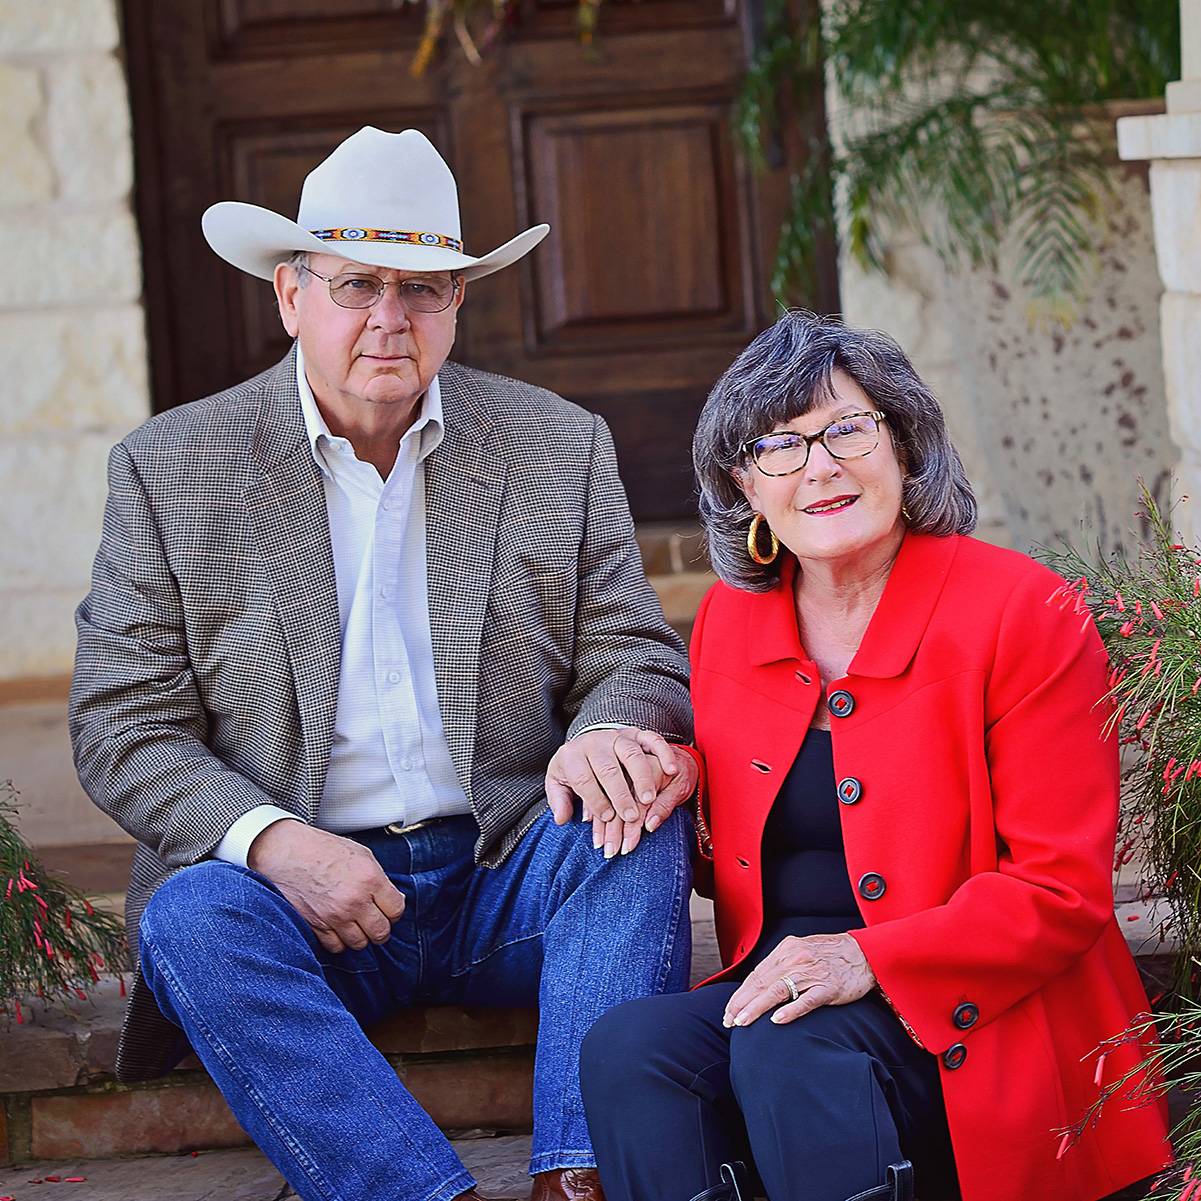 man in cowboy hat and woman in red jacket smile